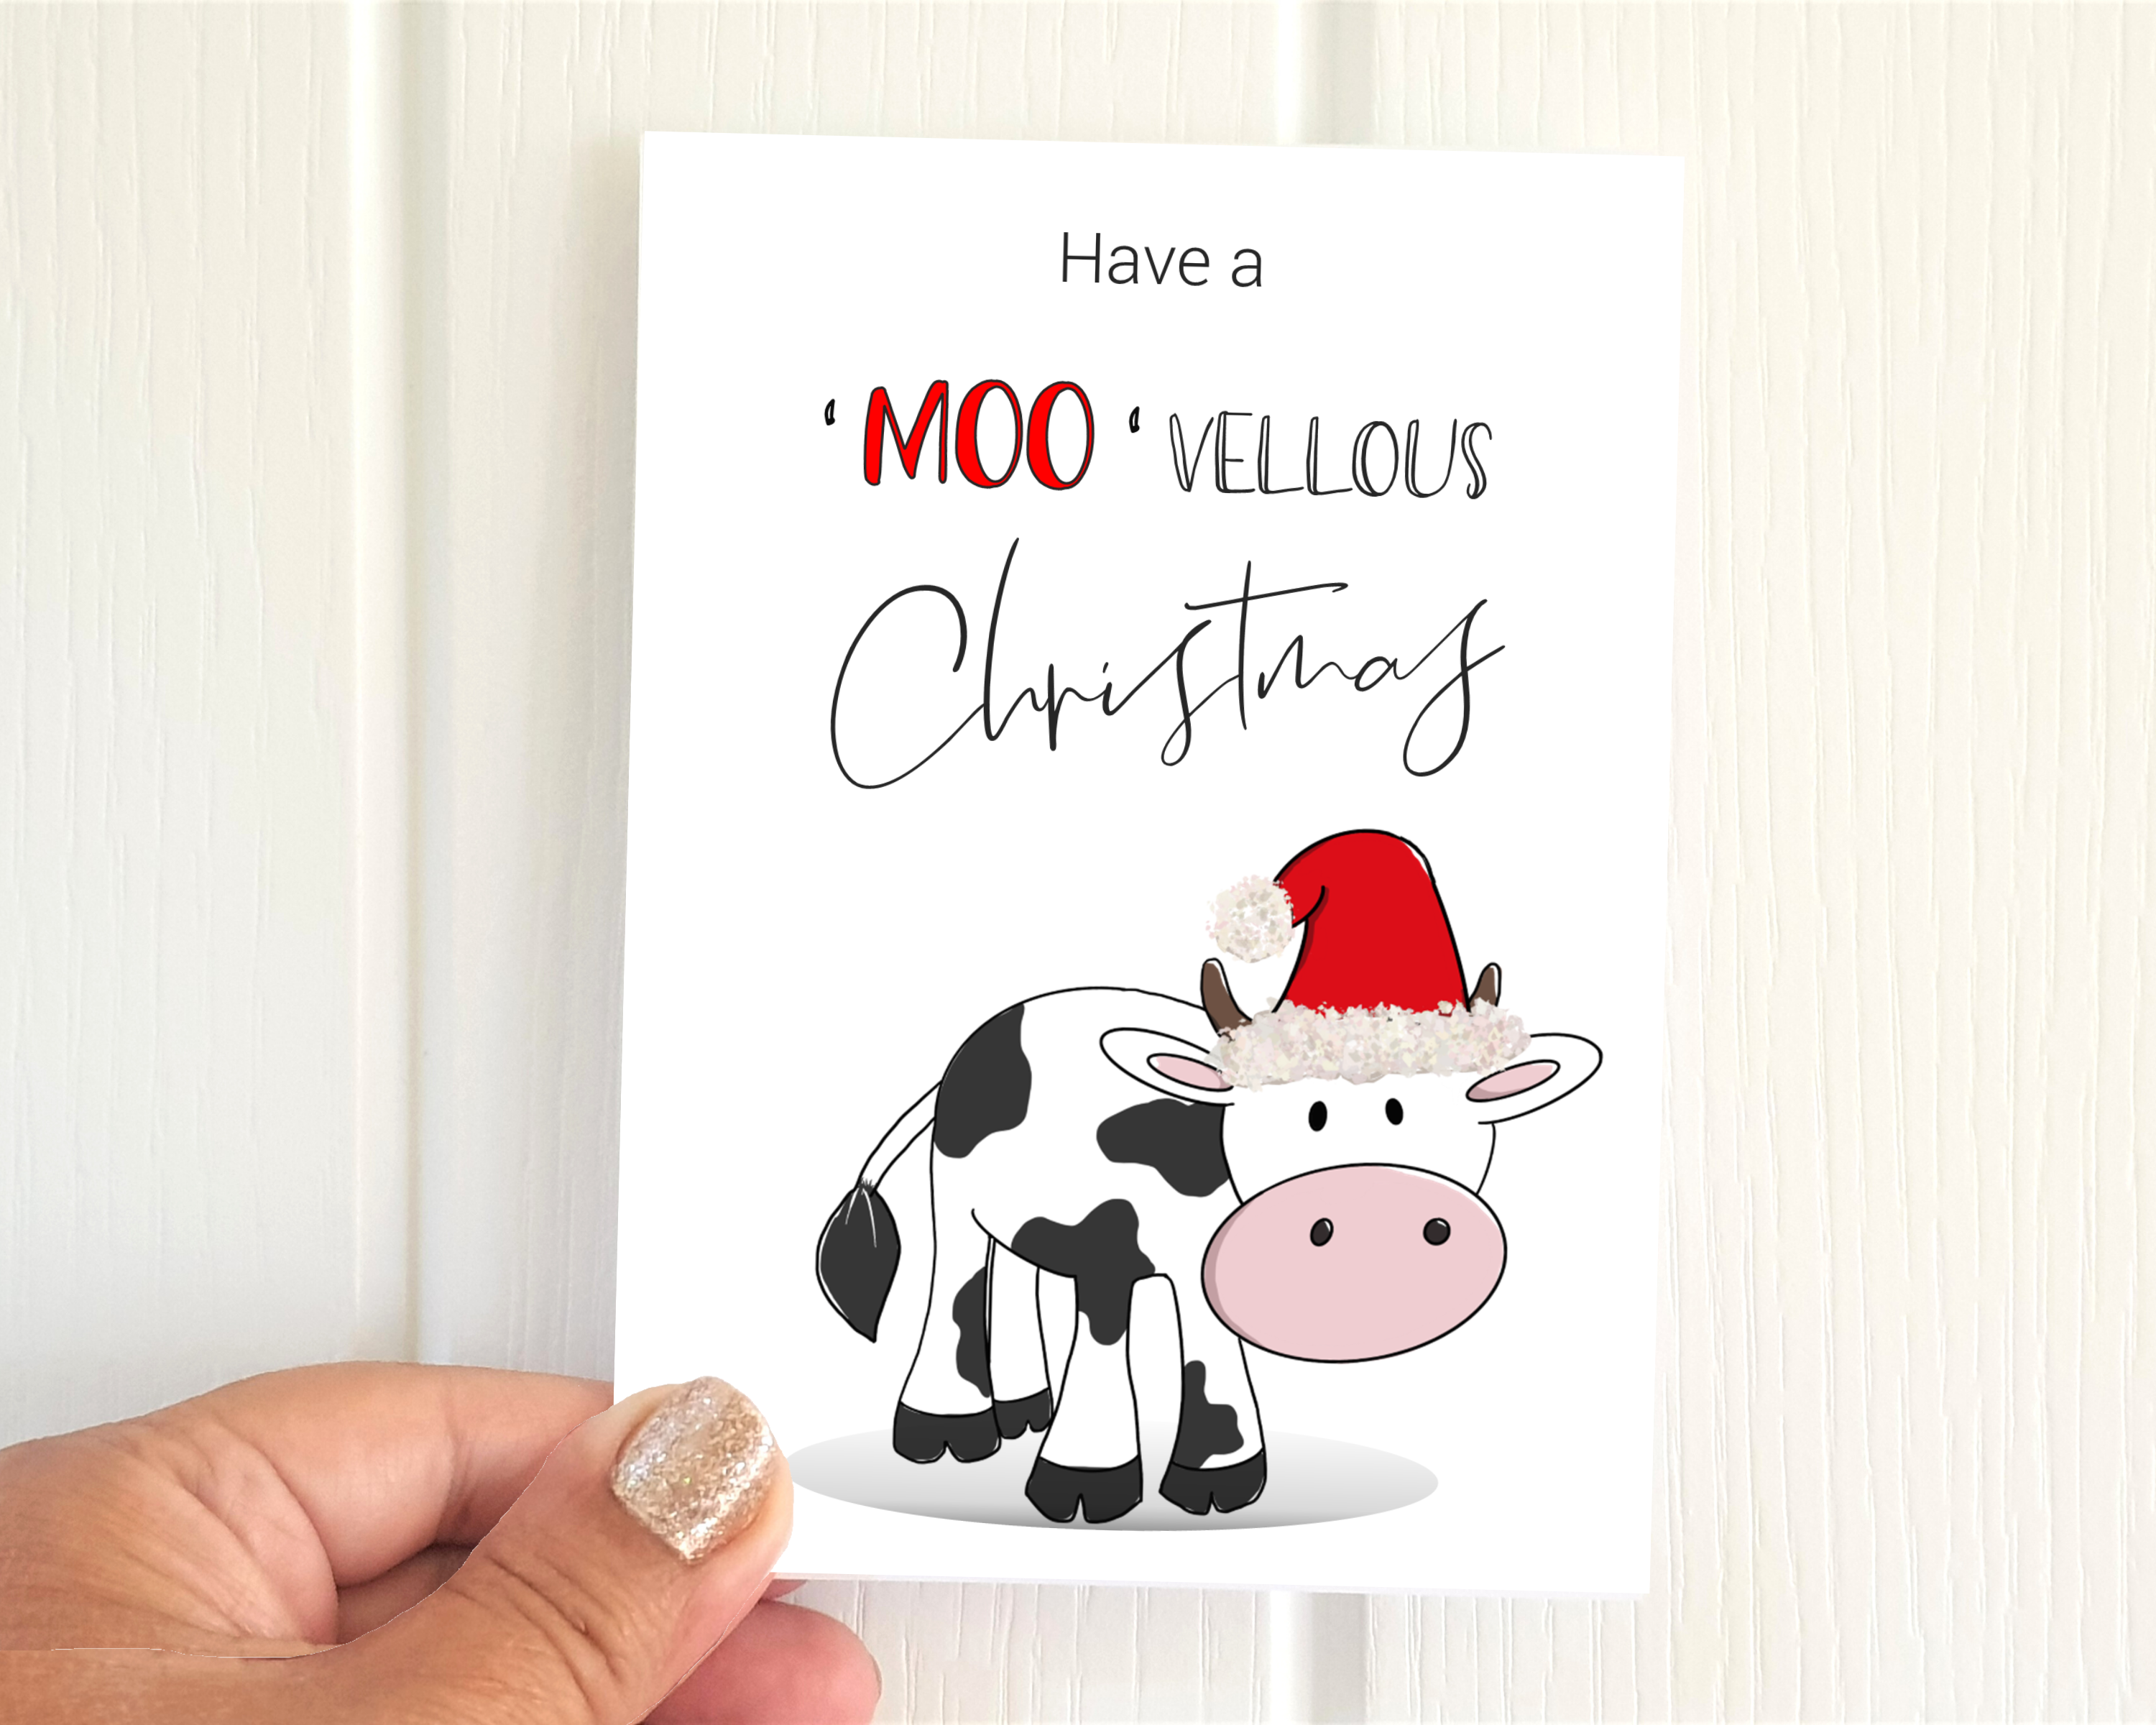 Poppleberry A6 'Moo-vellous Christmas' Christmas Cards on White Cardstock, Size Compared to Thumb.